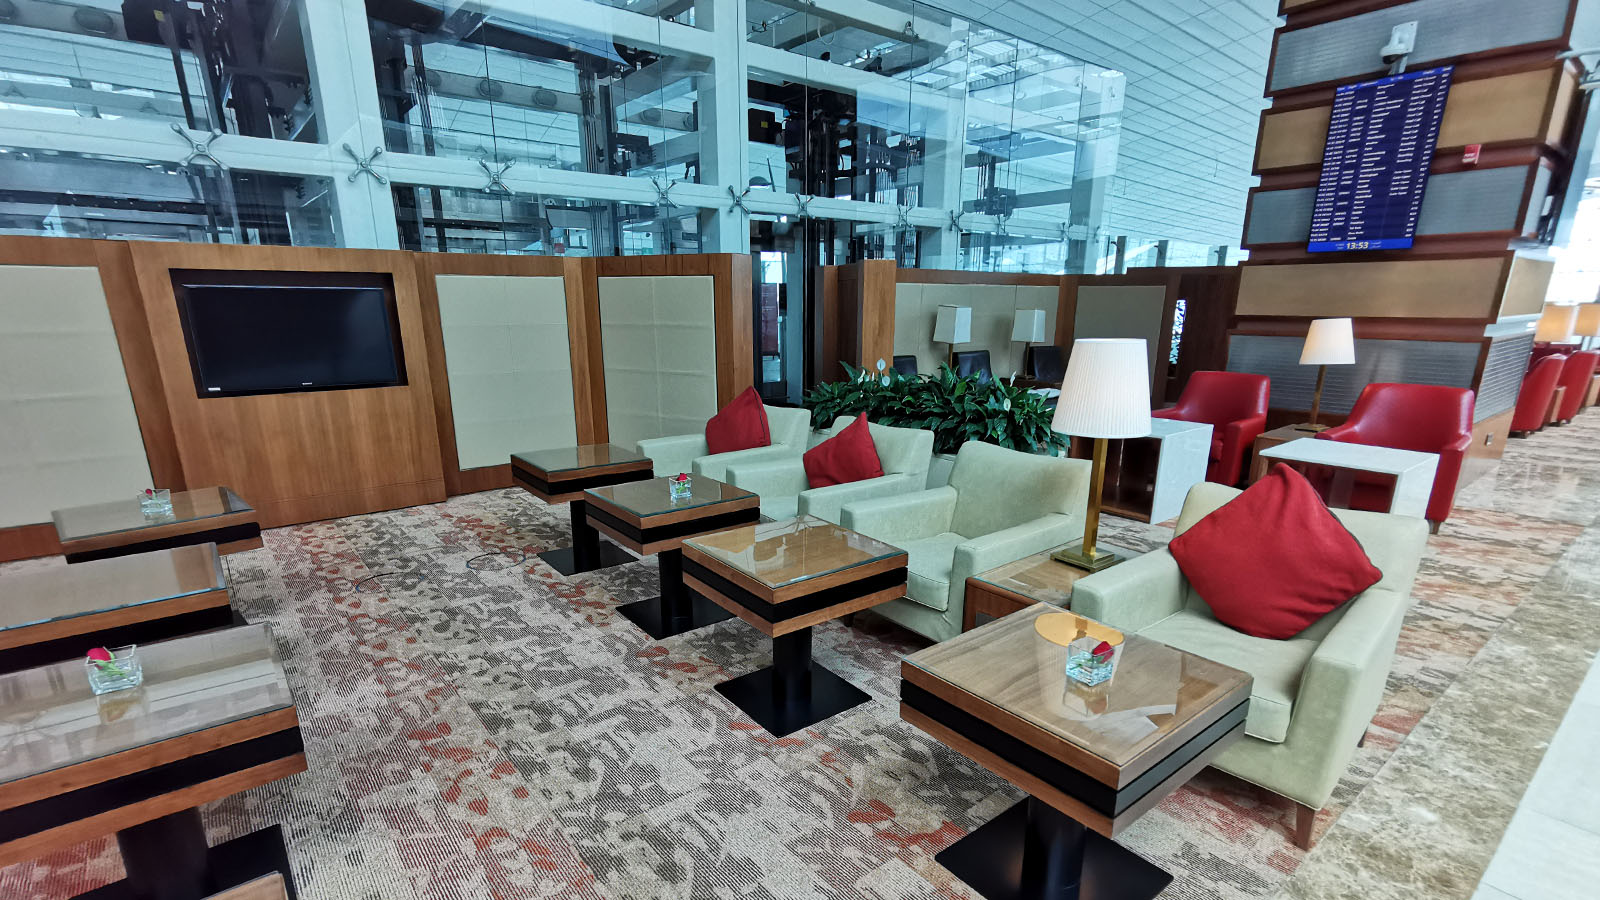 Chairs in the Emirates Business Class Lounge, Dubai Concourse A